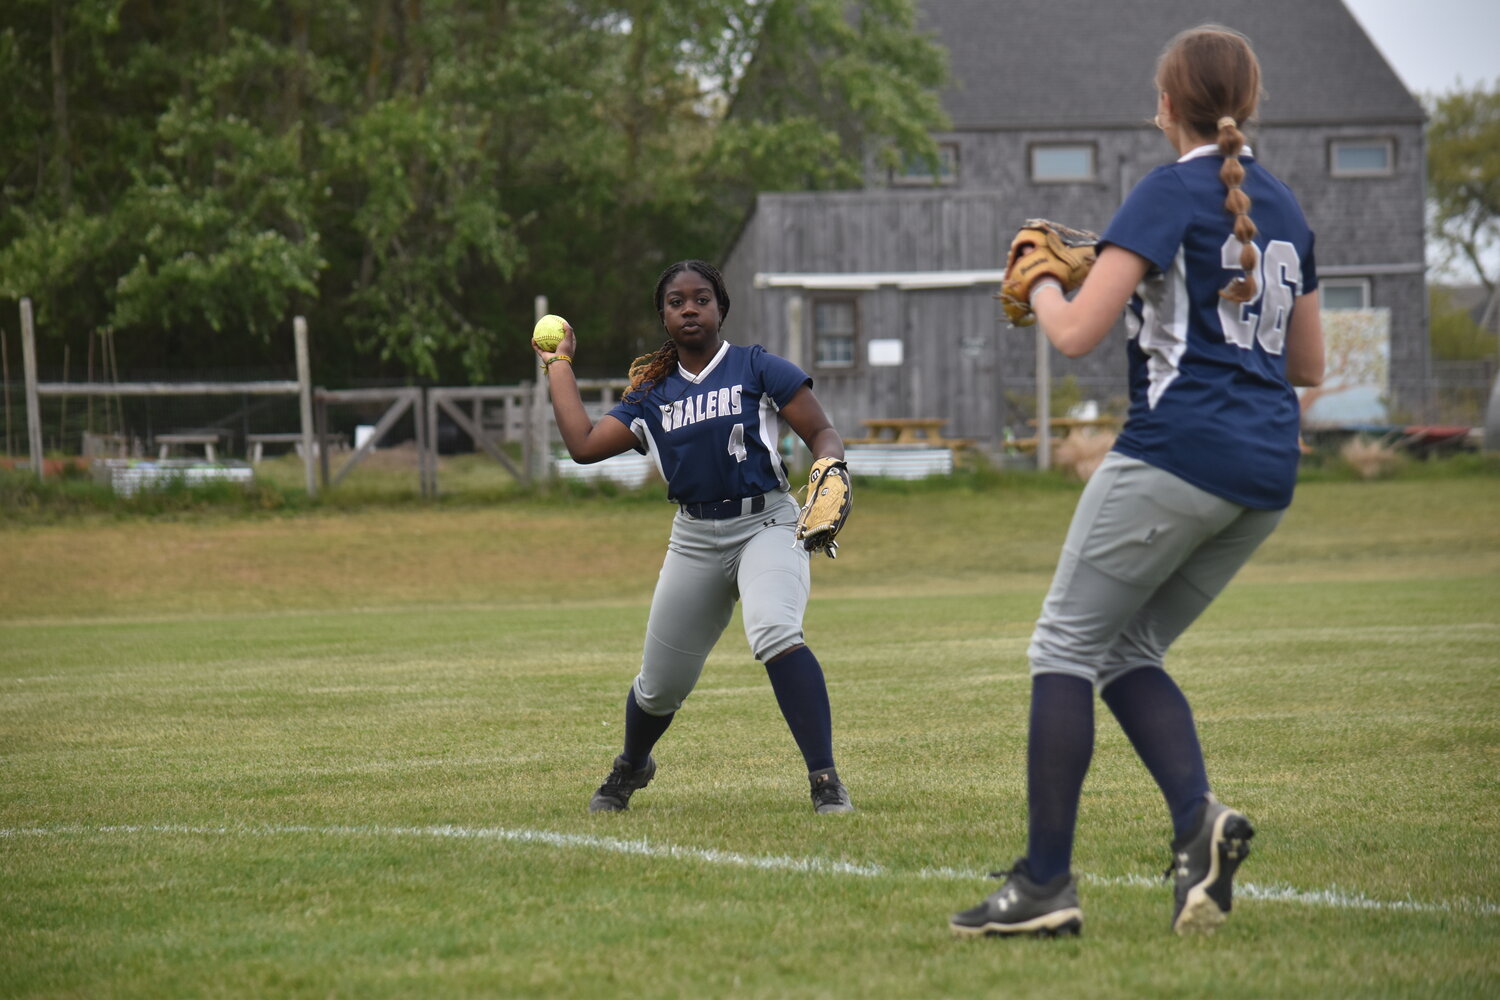 Rihanna Cranston throws the ball in from the outfield.